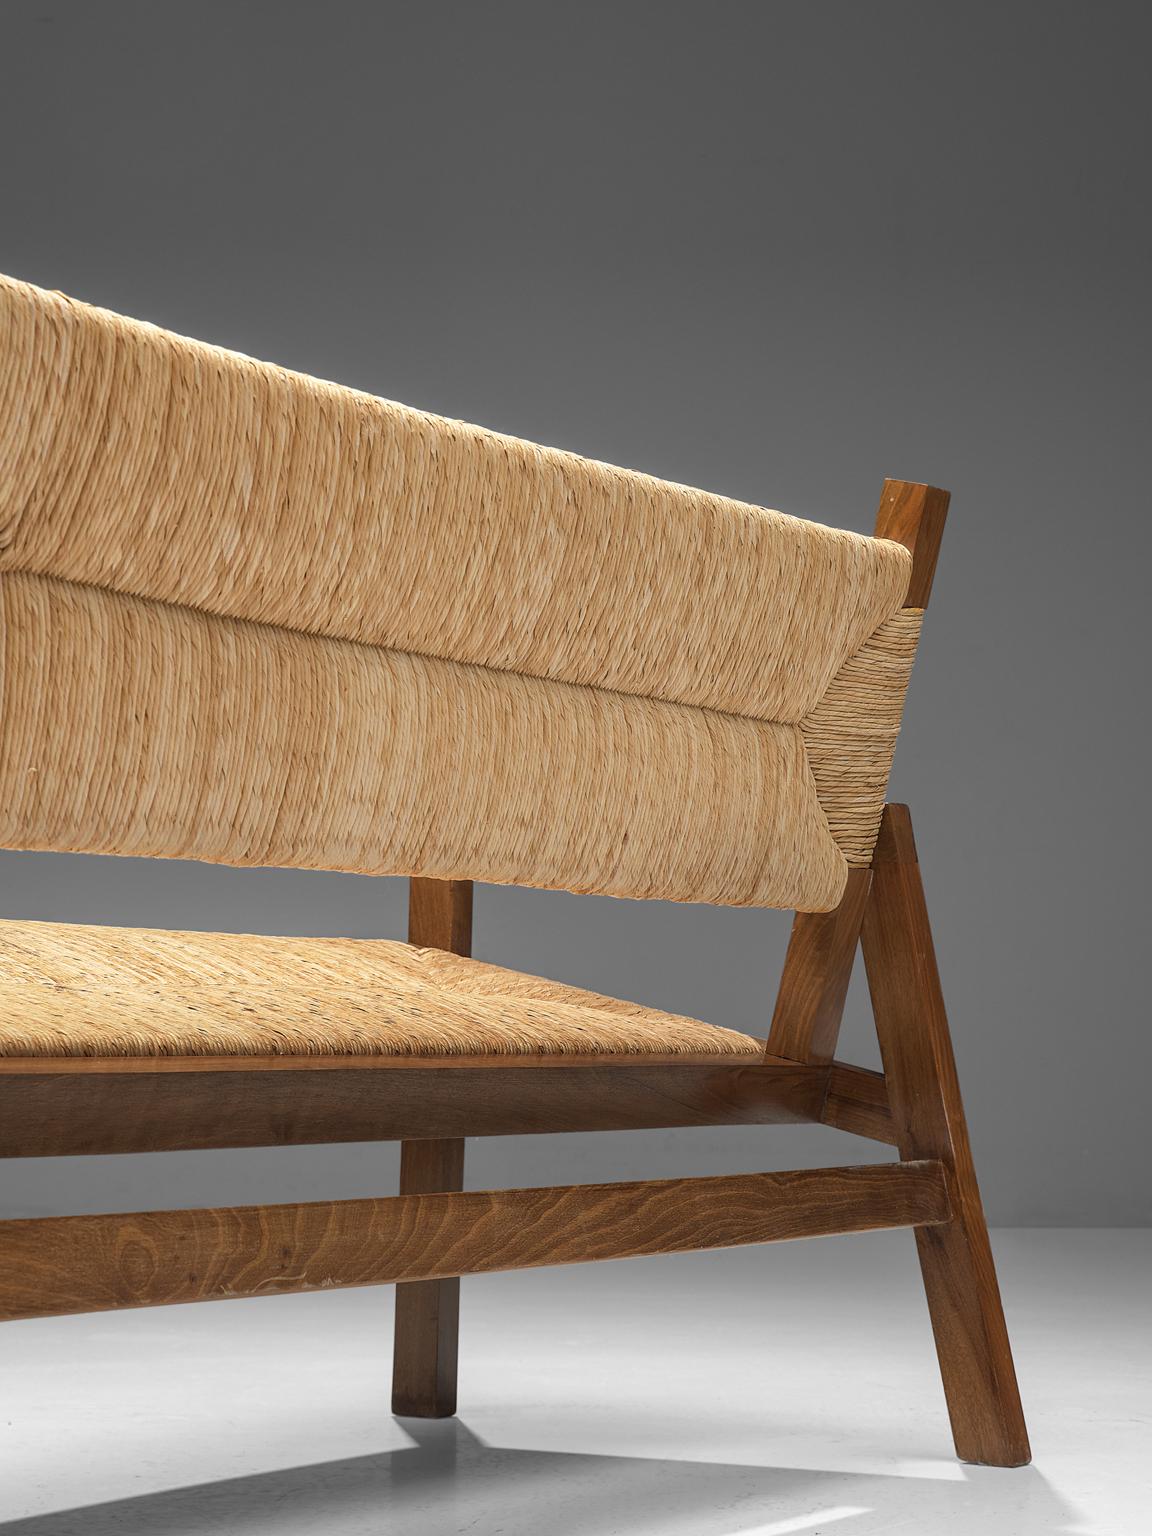 Late 20th Century Refined Bench in Walnut and Cane, Spain